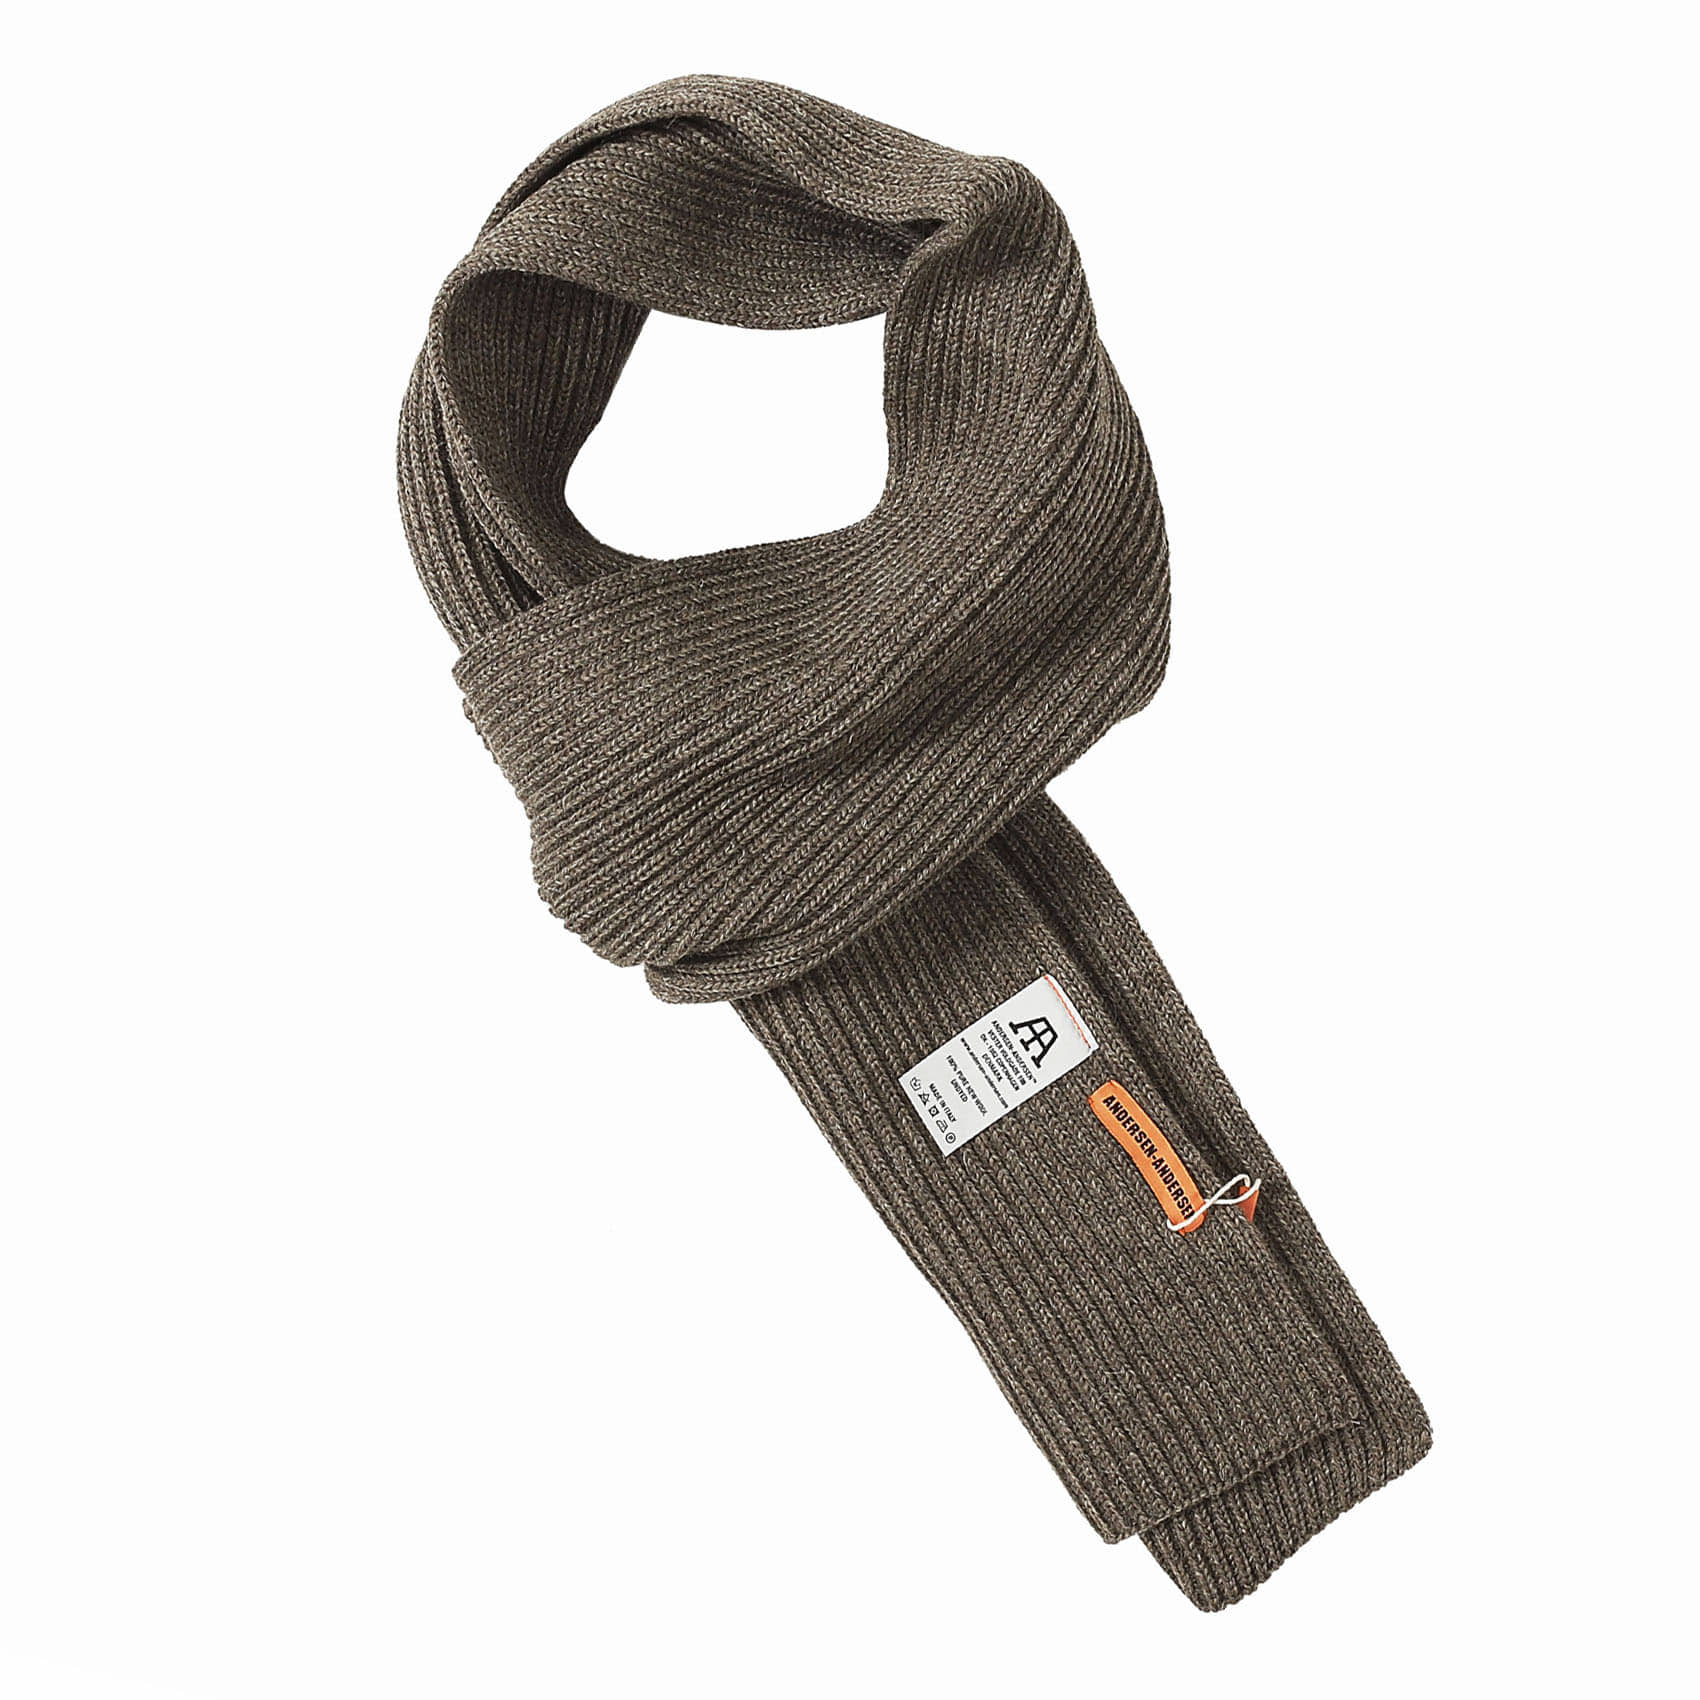 WIDE SCARF - NATURAL TAUPE